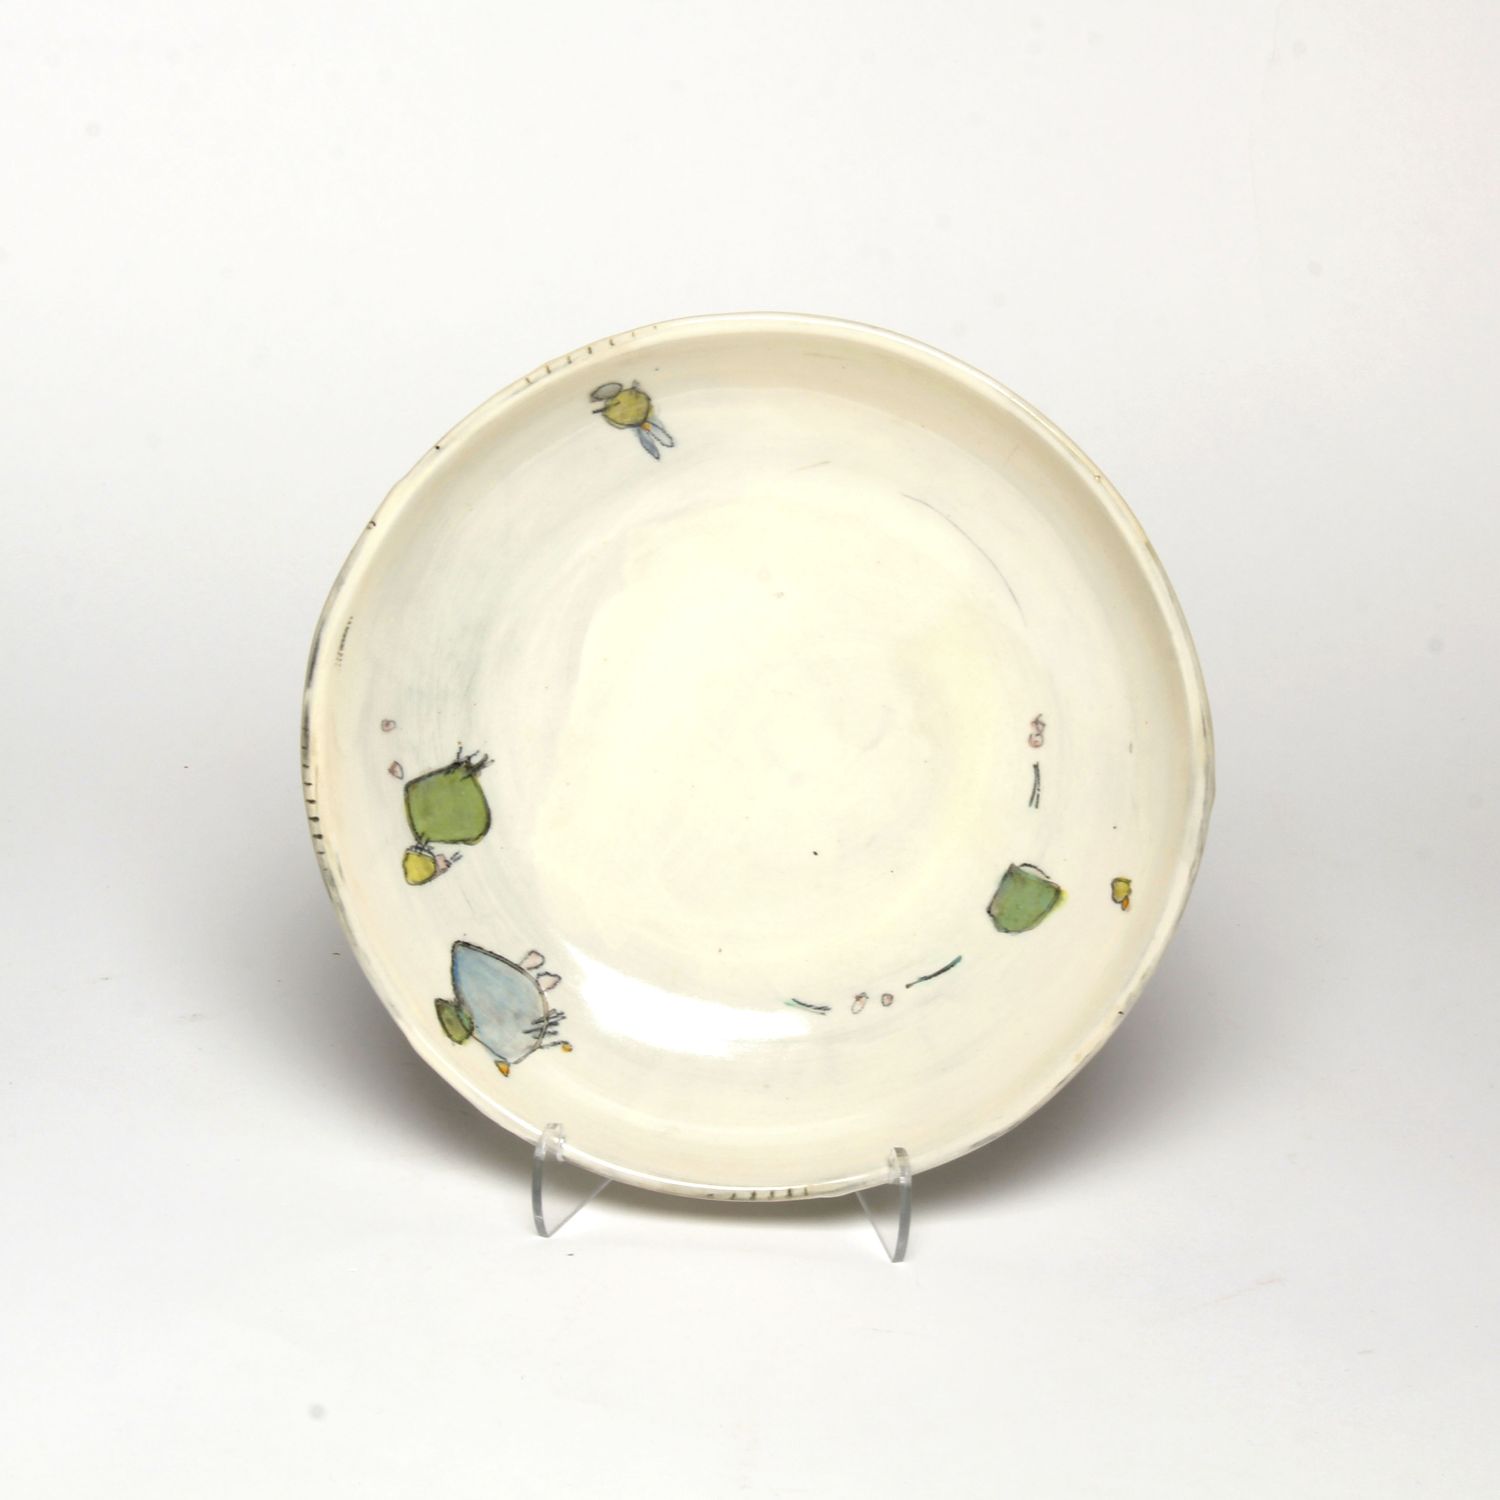 Stephen Hawes: Shallow Bowl Product Image 1 of 1